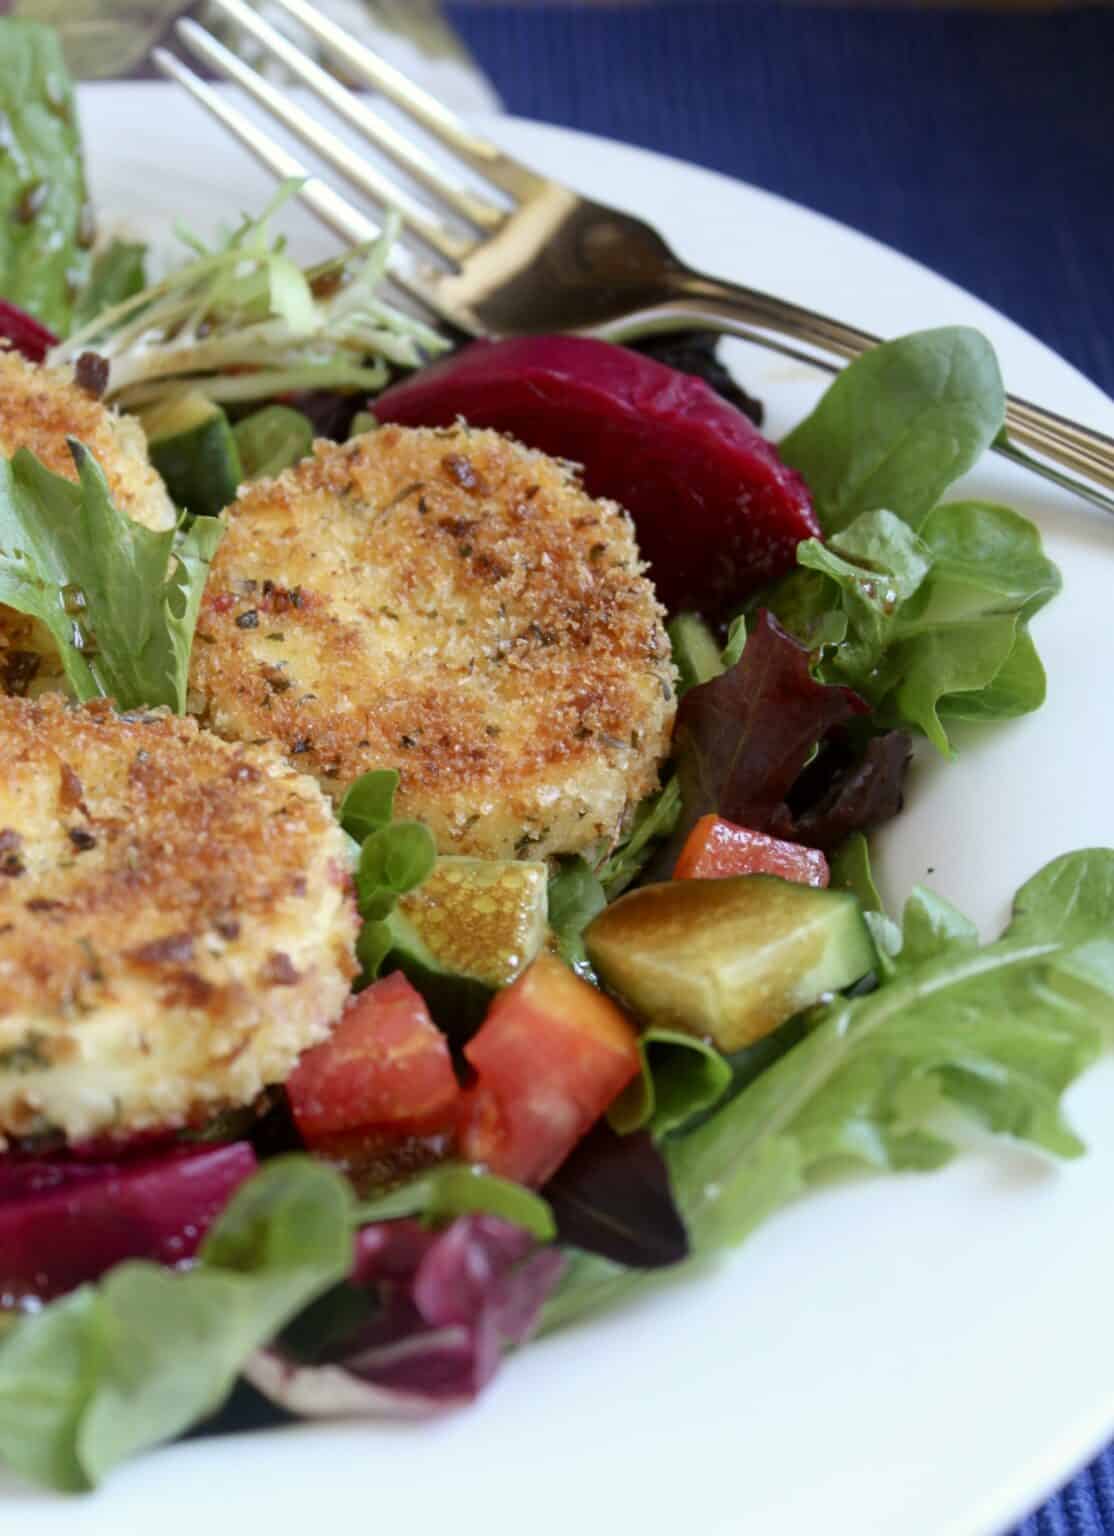 An up close photo of salad greens topped with sliced beets, diced cucumbers, tomatoes, and topped with three breaded rounds of goat cheese. The salad is served on a white plate with a fork to the side.